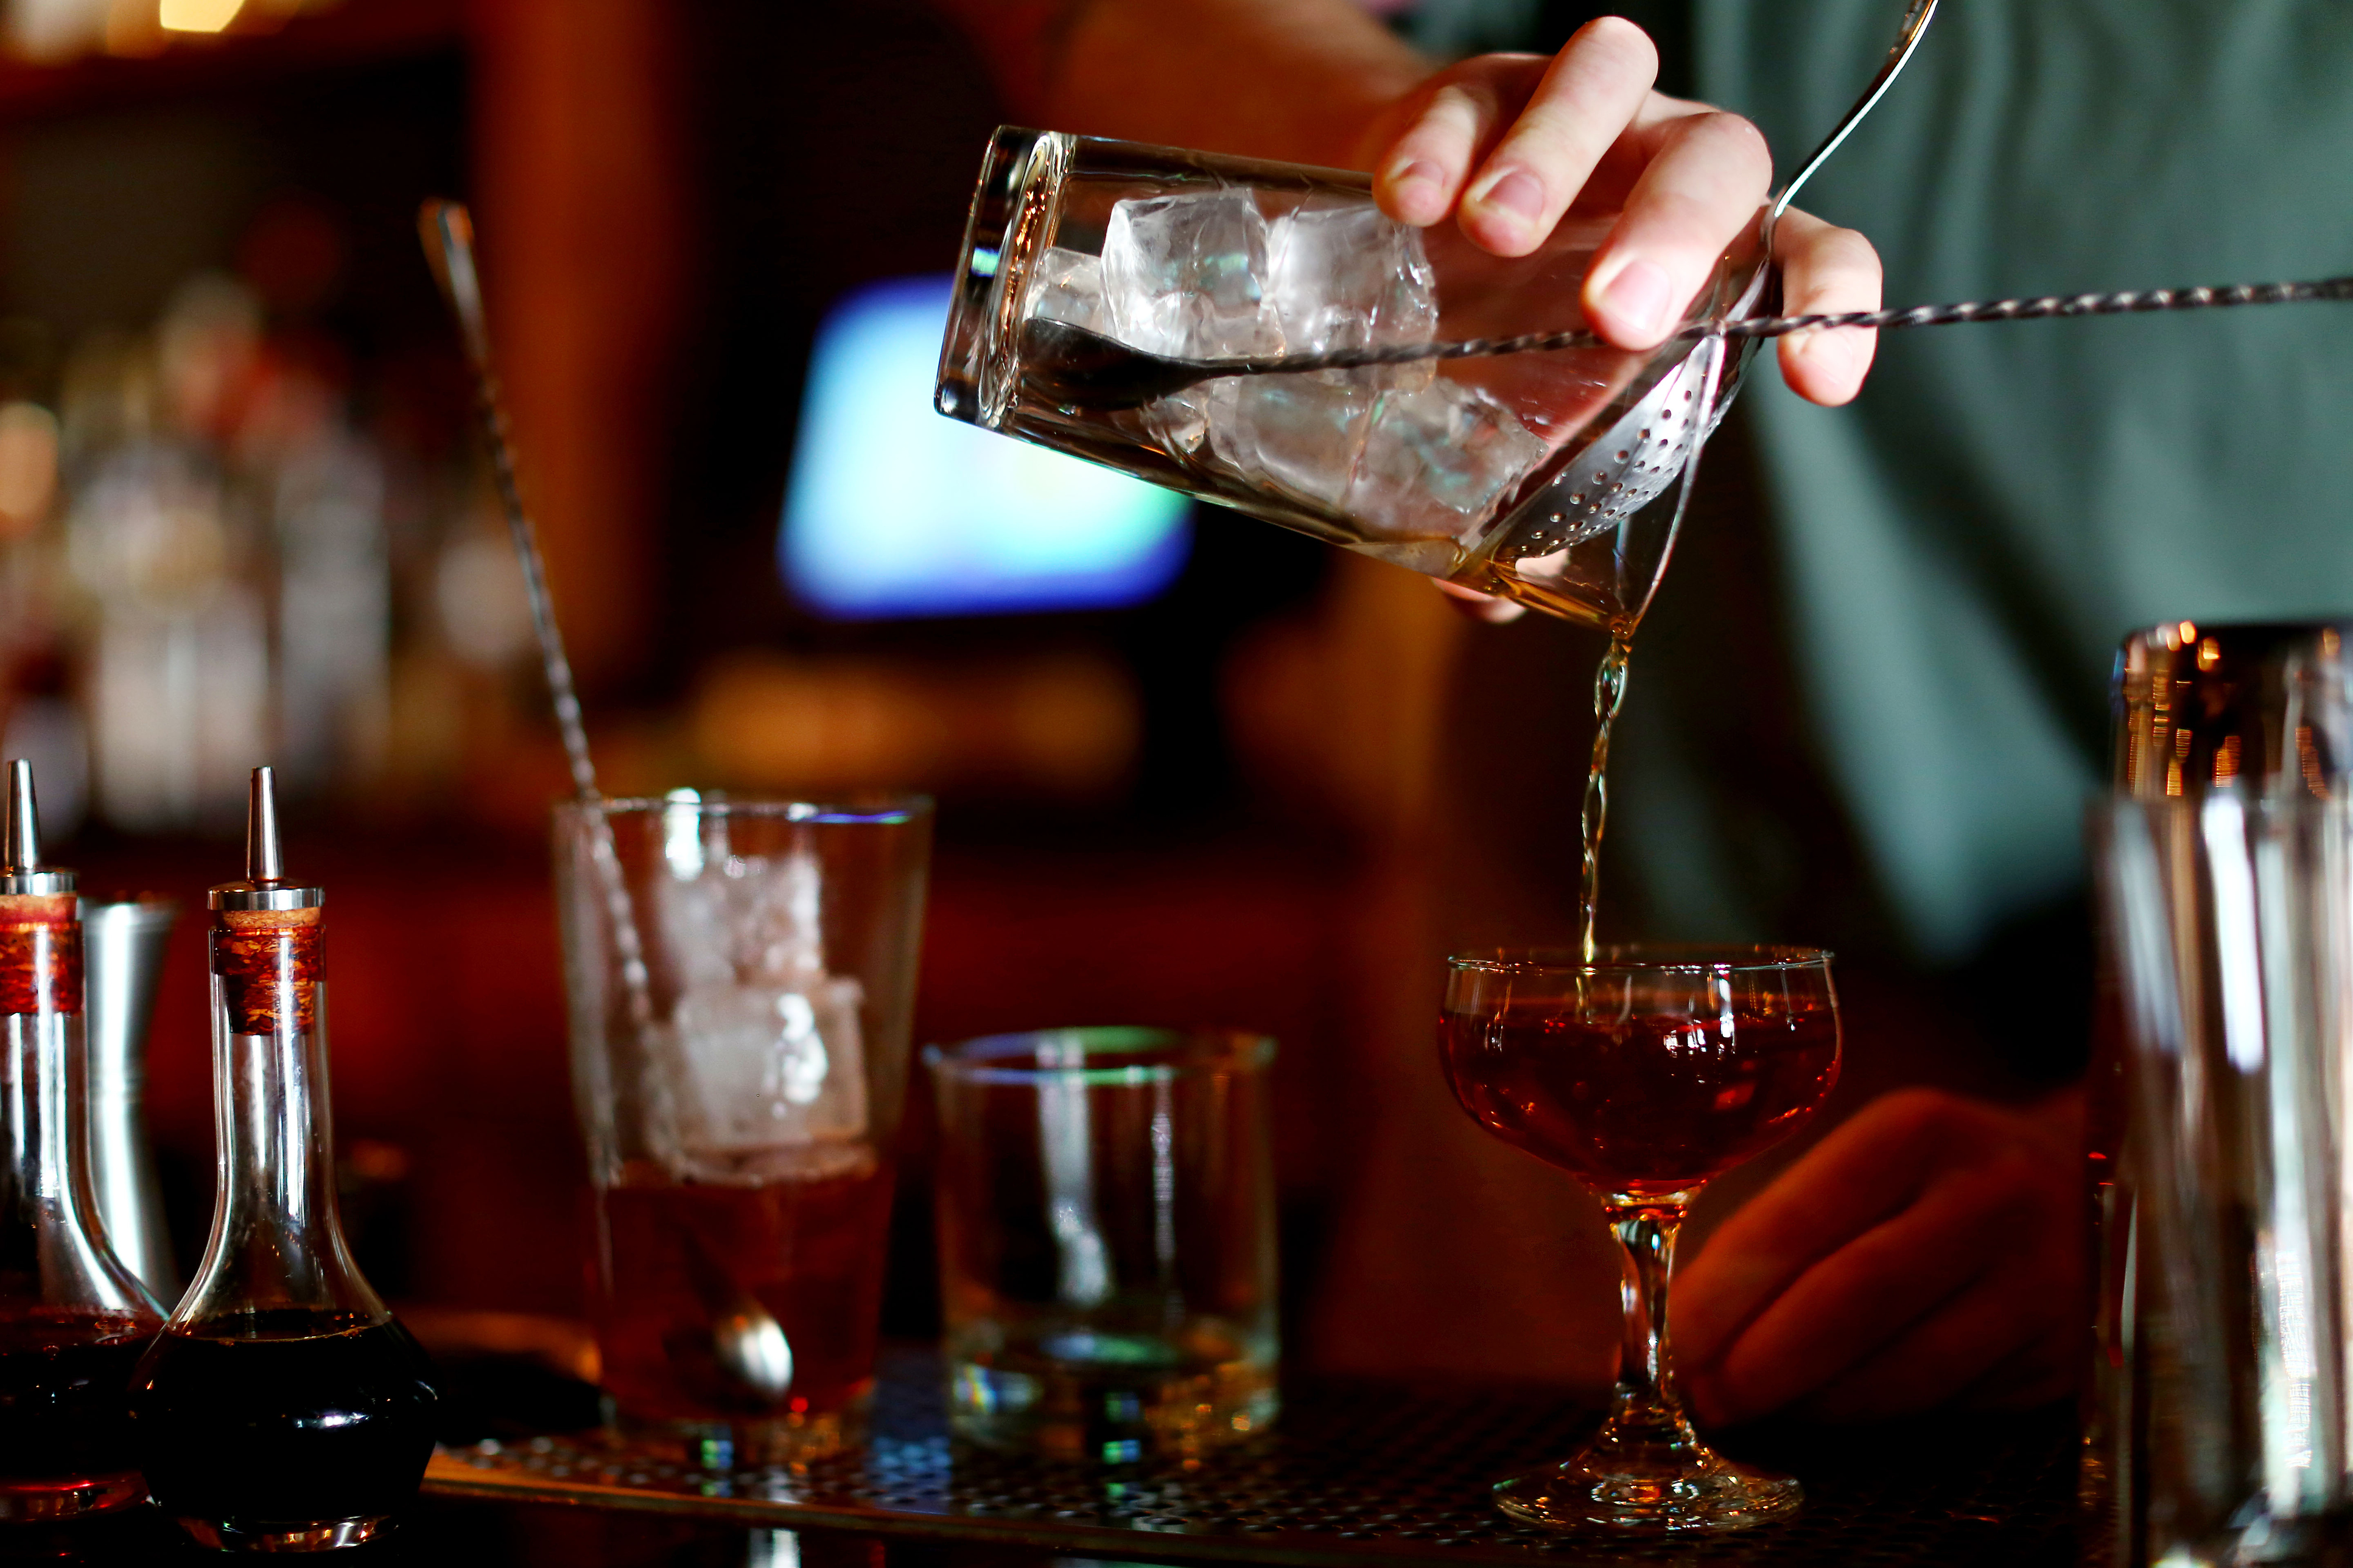 A bartender mixes up a whiskey cocktail in a bar (Marianna Massey - Getty Images)